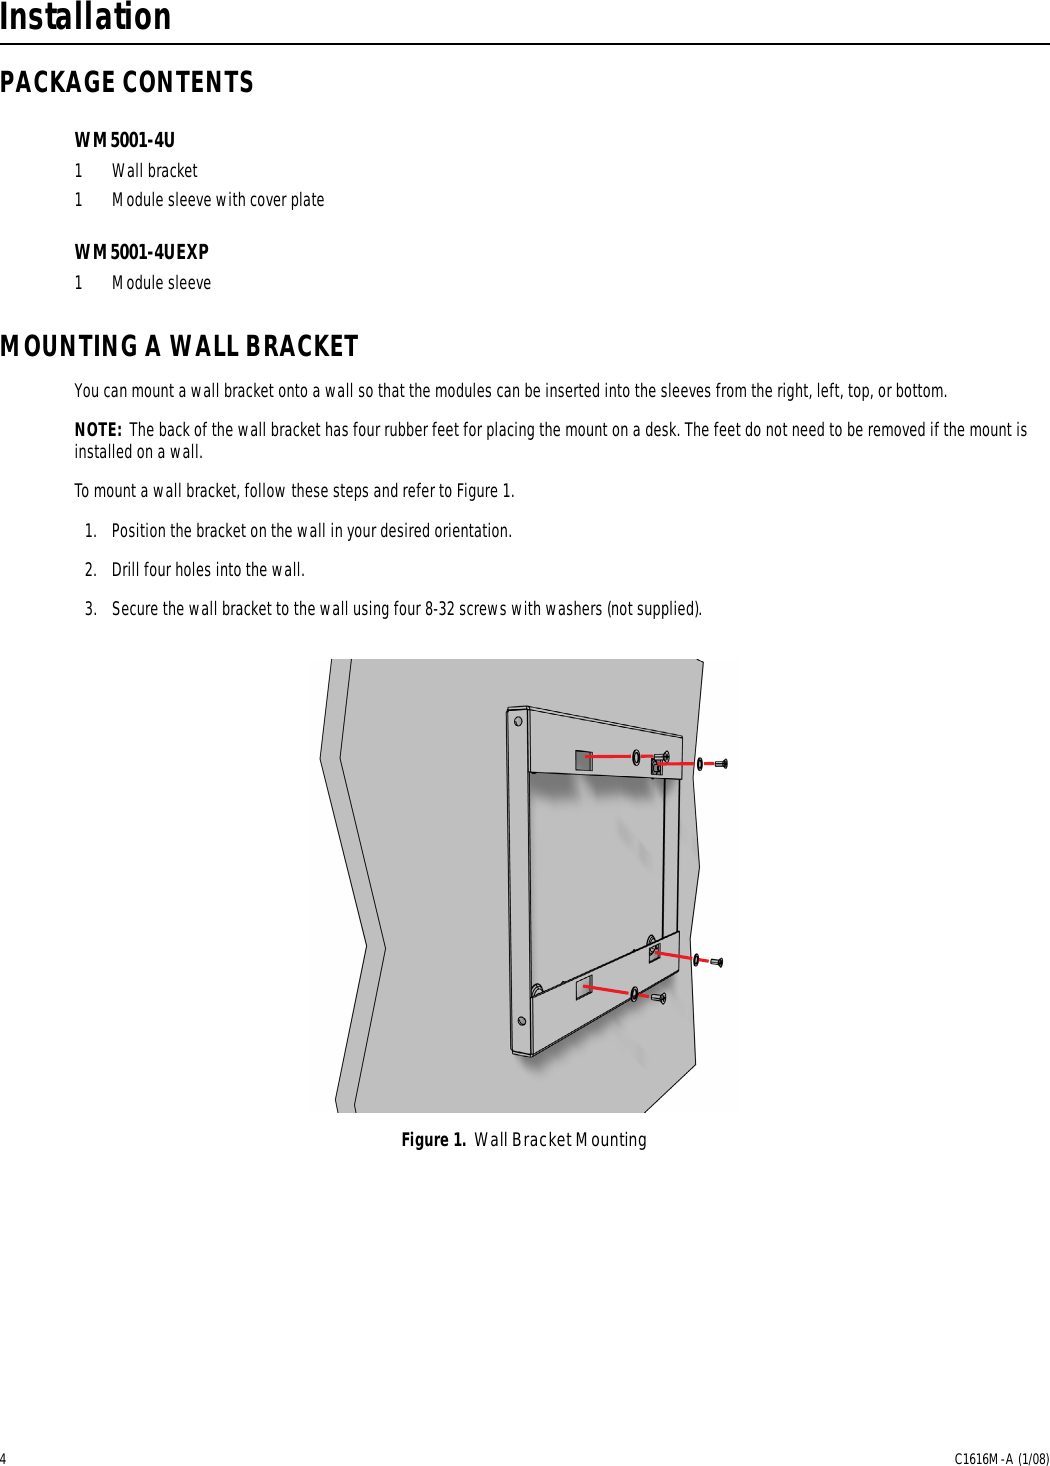 Page 4 of 8 - Pelco Pelco-W-M-5000-Series-Users-Manual- Pelco_WM5000_Series_Wall_Mount_Kit_manual  Pelco-w-m-5000-series-users-manual